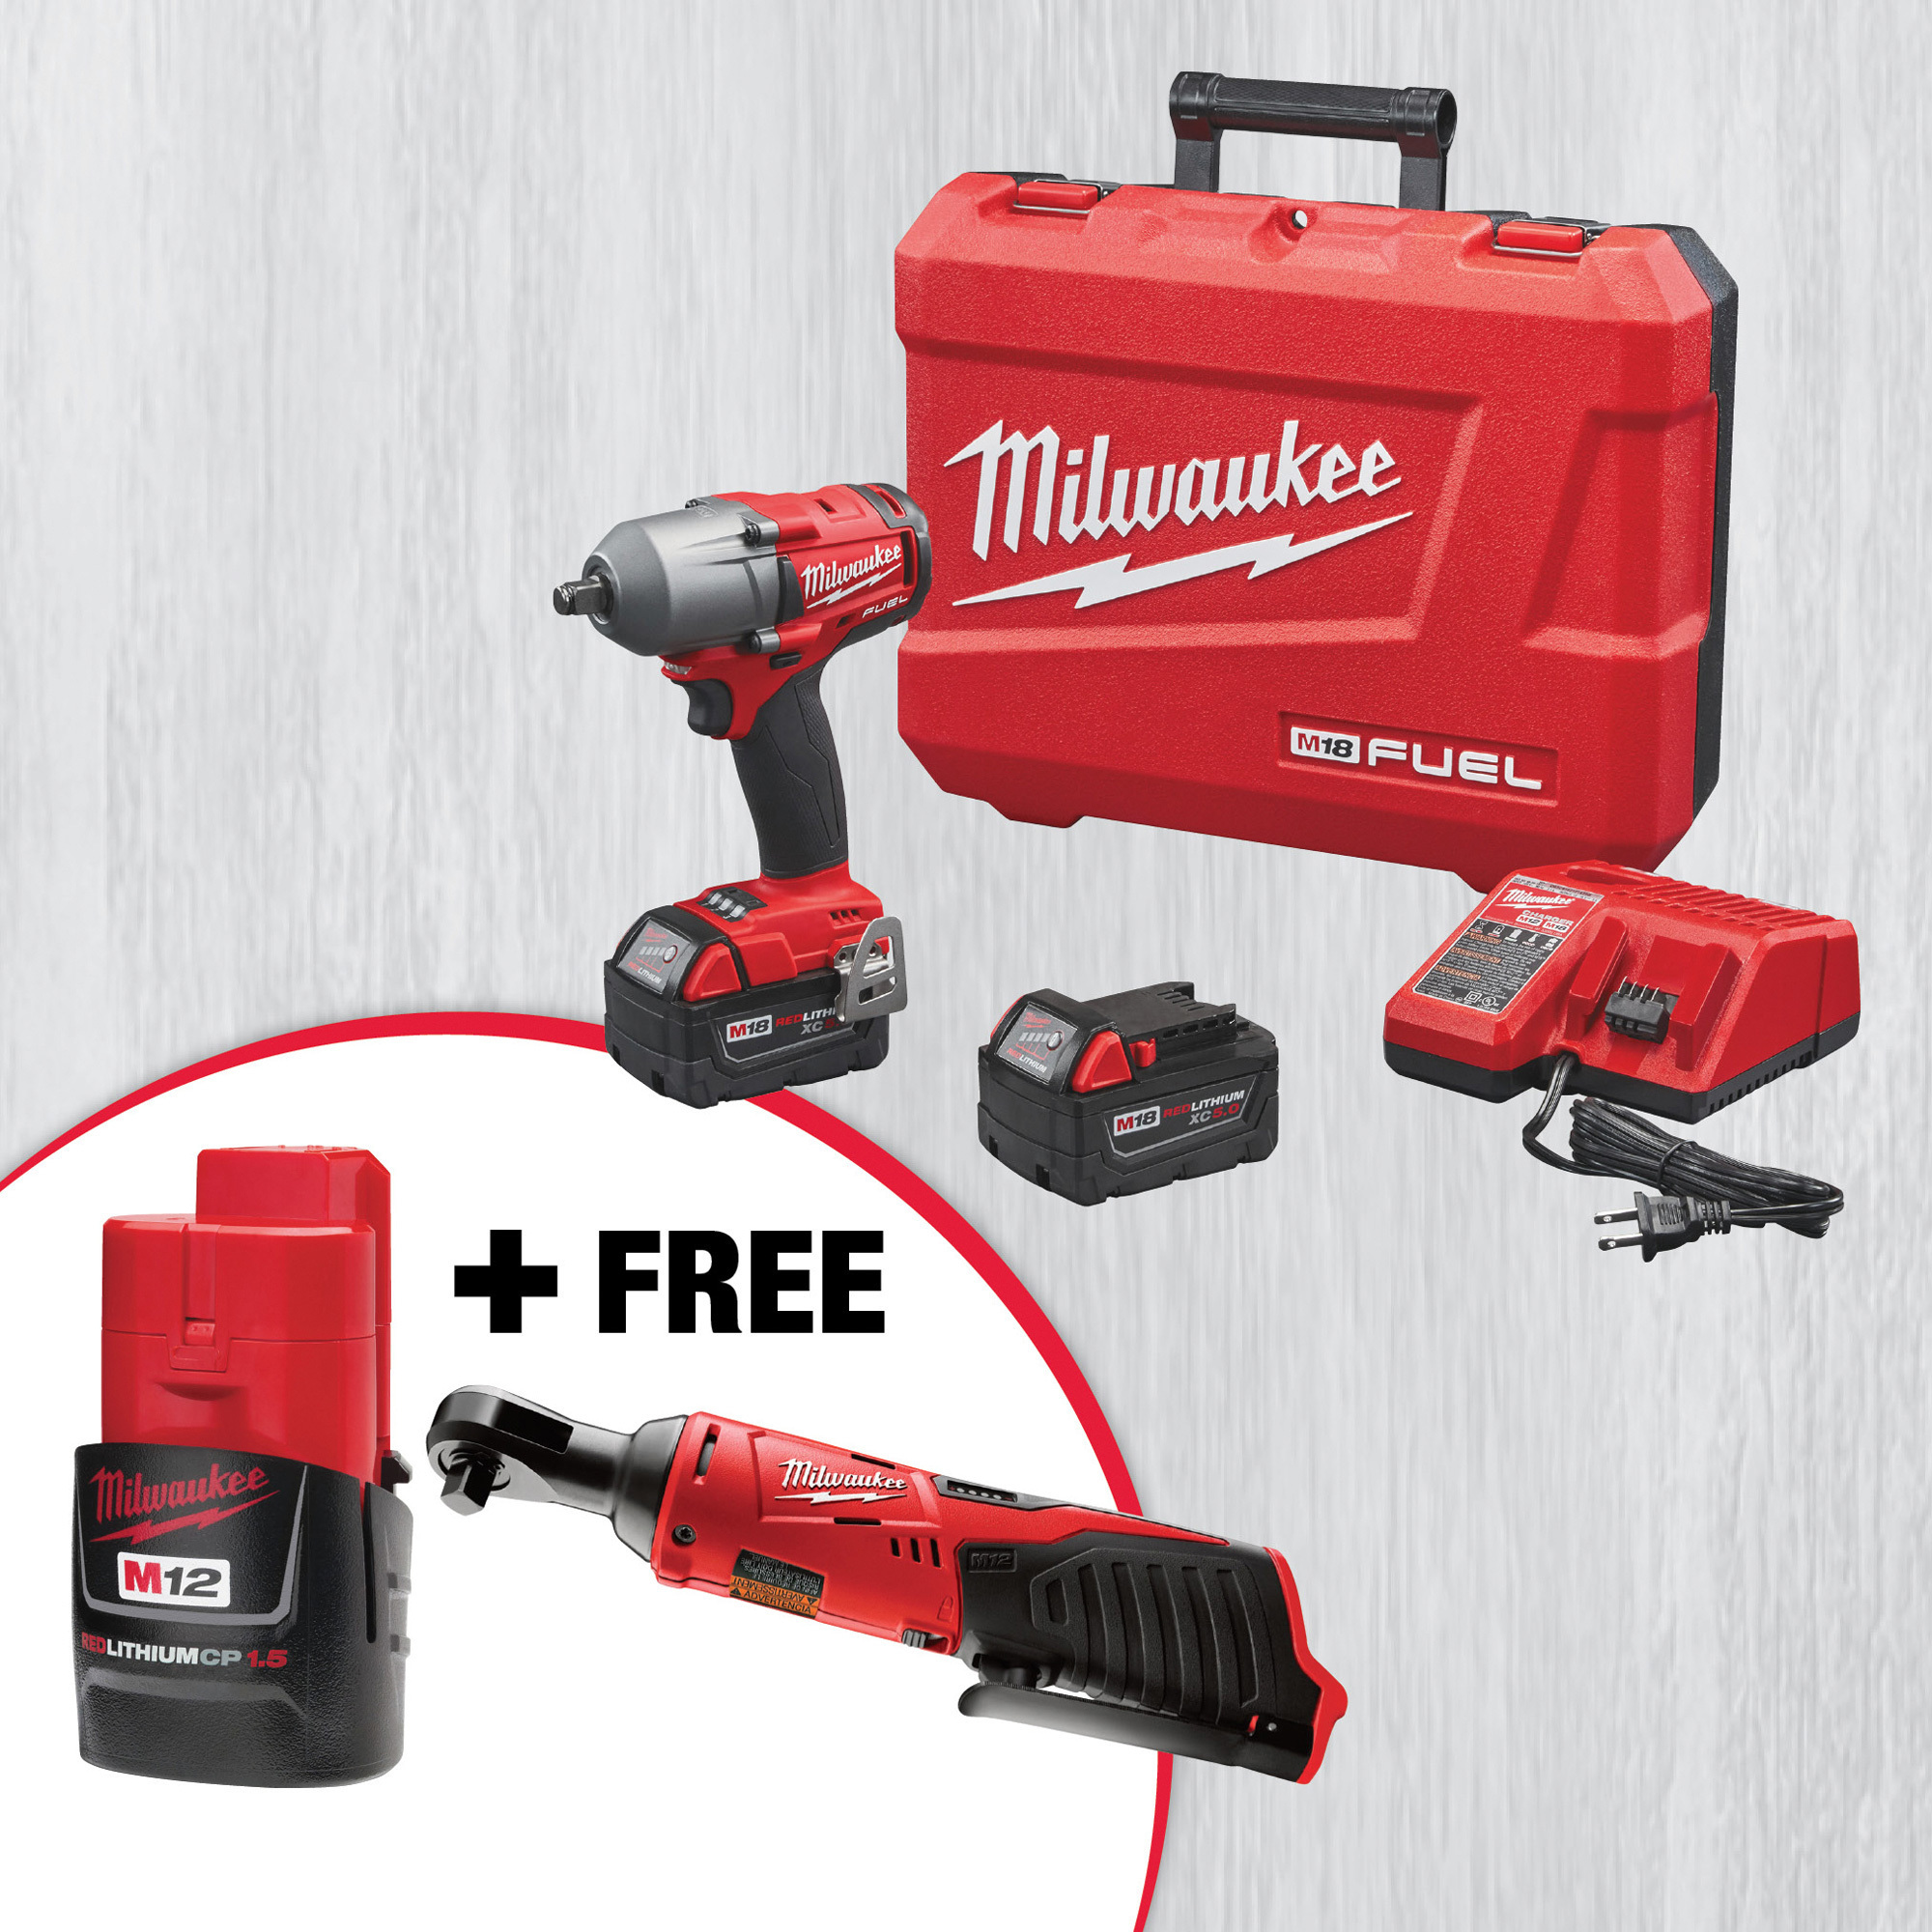 SPECIAL BUY! Milwaukee M18 FUEL Cordless Brushless 1/2in. Mid-Torque Impact  Wrench Kit with Friction Ring (2861-22) with FREE M12 3/8in. Ratchet  (2457-20) and M12 RedLithium CP1.5 Battery (48-11-2401)! Northern Tool